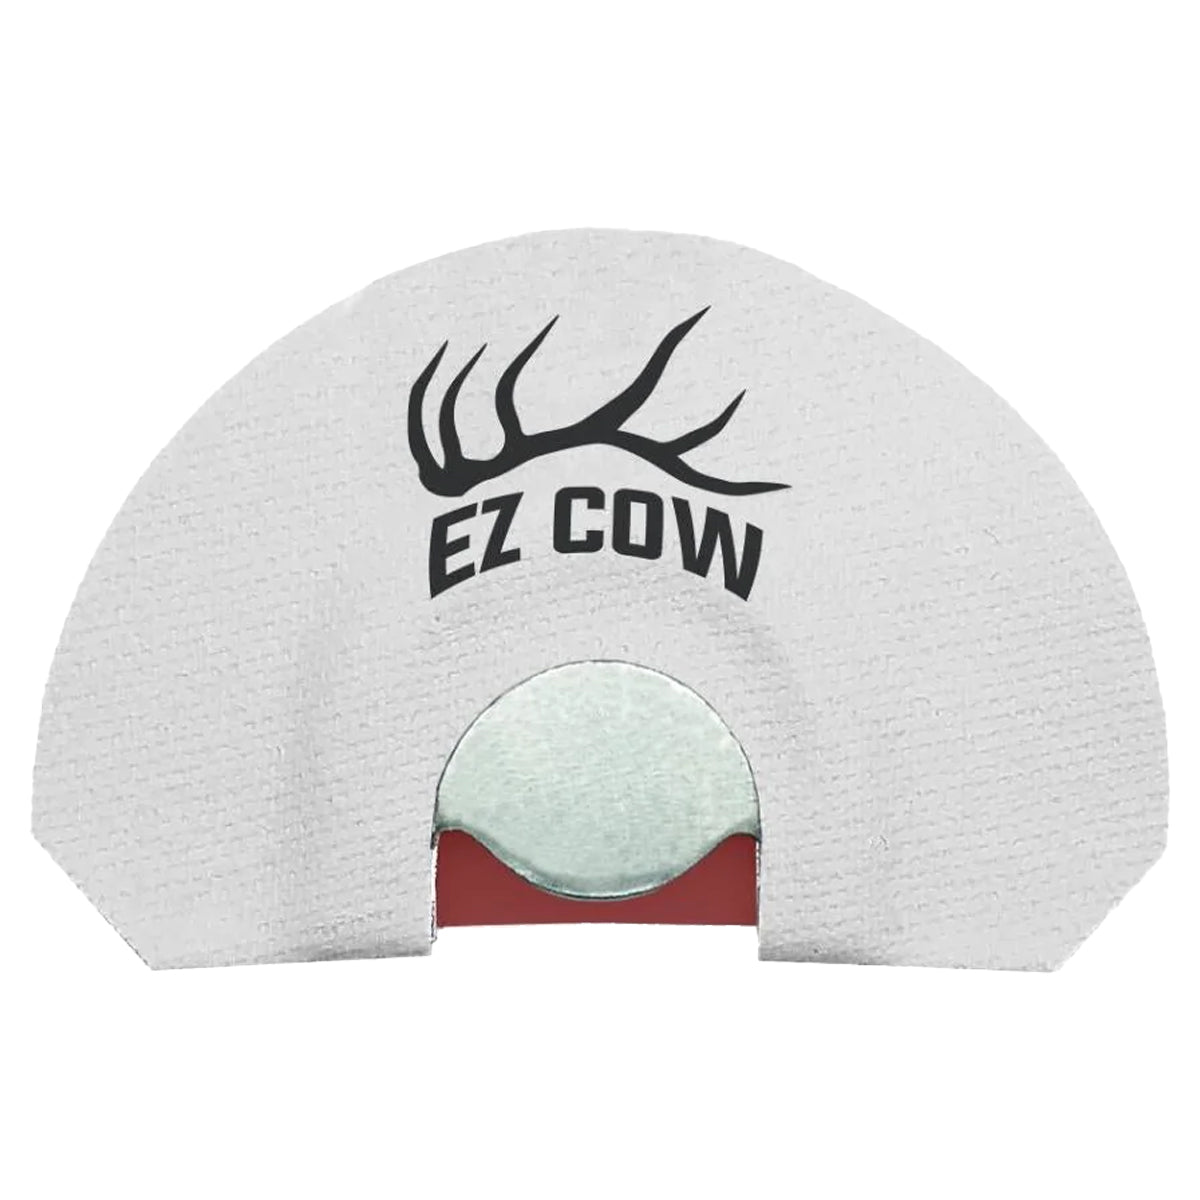 Born and Raised Call Co. EZ Cow in  by GOHUNT | Born and Raised Call Co. - GOHUNT Shop